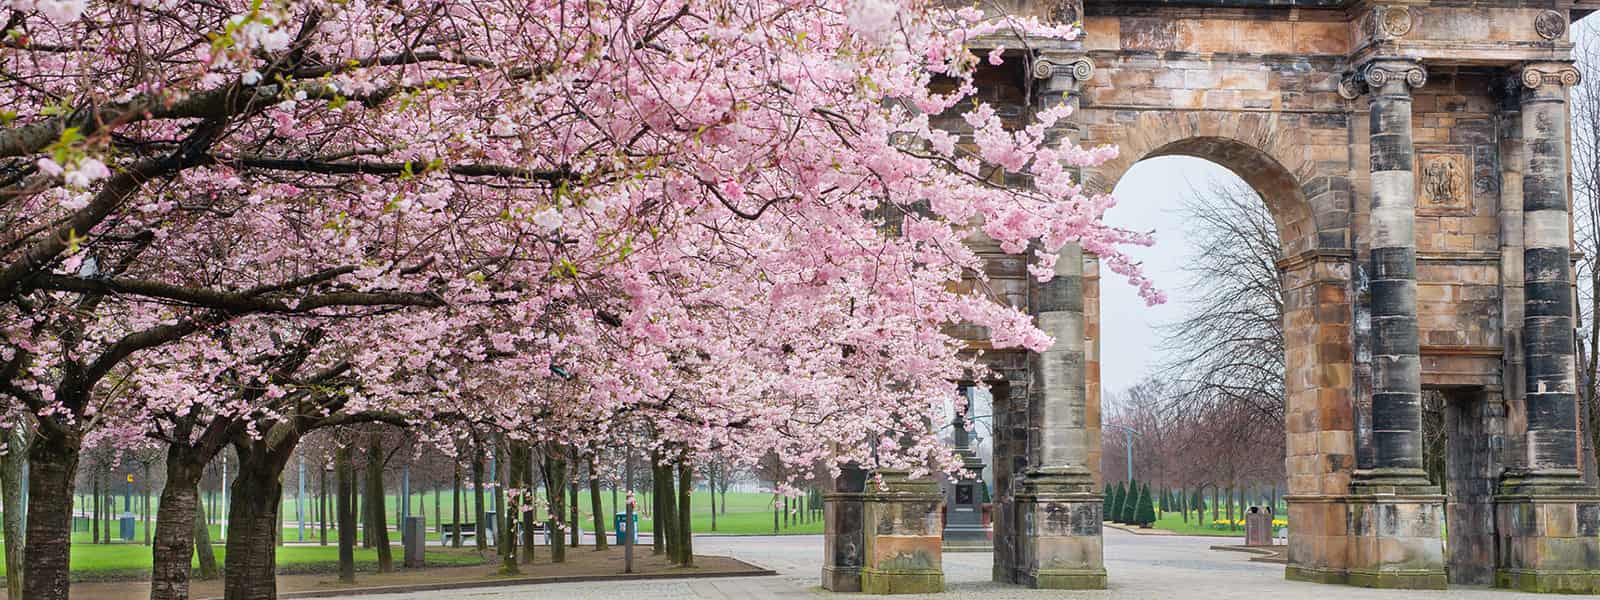 The McLennan Arch at the entrance to Glasgow Greem, with cherry blossom trees in bloom